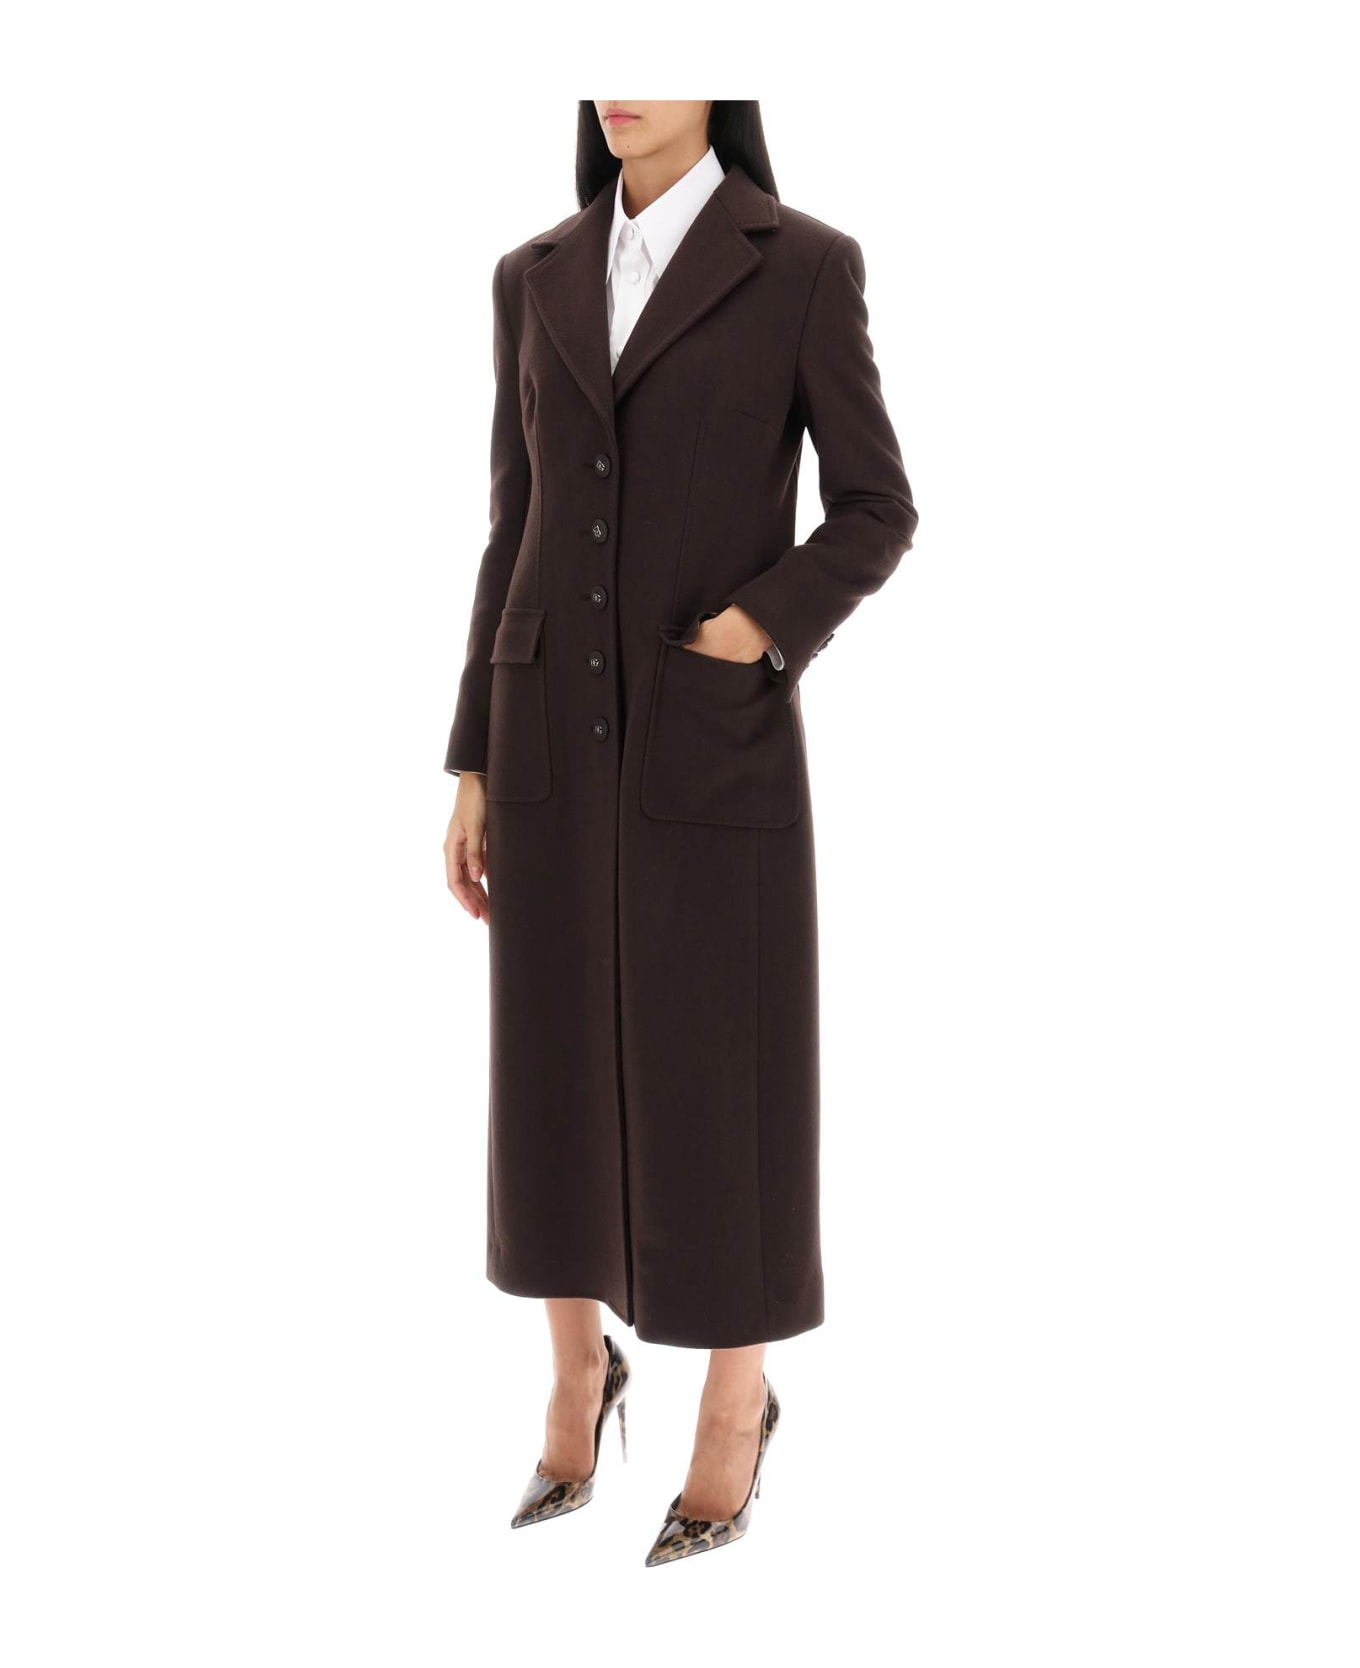 Dolce & Gabbana Shaped Coat In Wool And Cashmere - Marrone Scuro 4